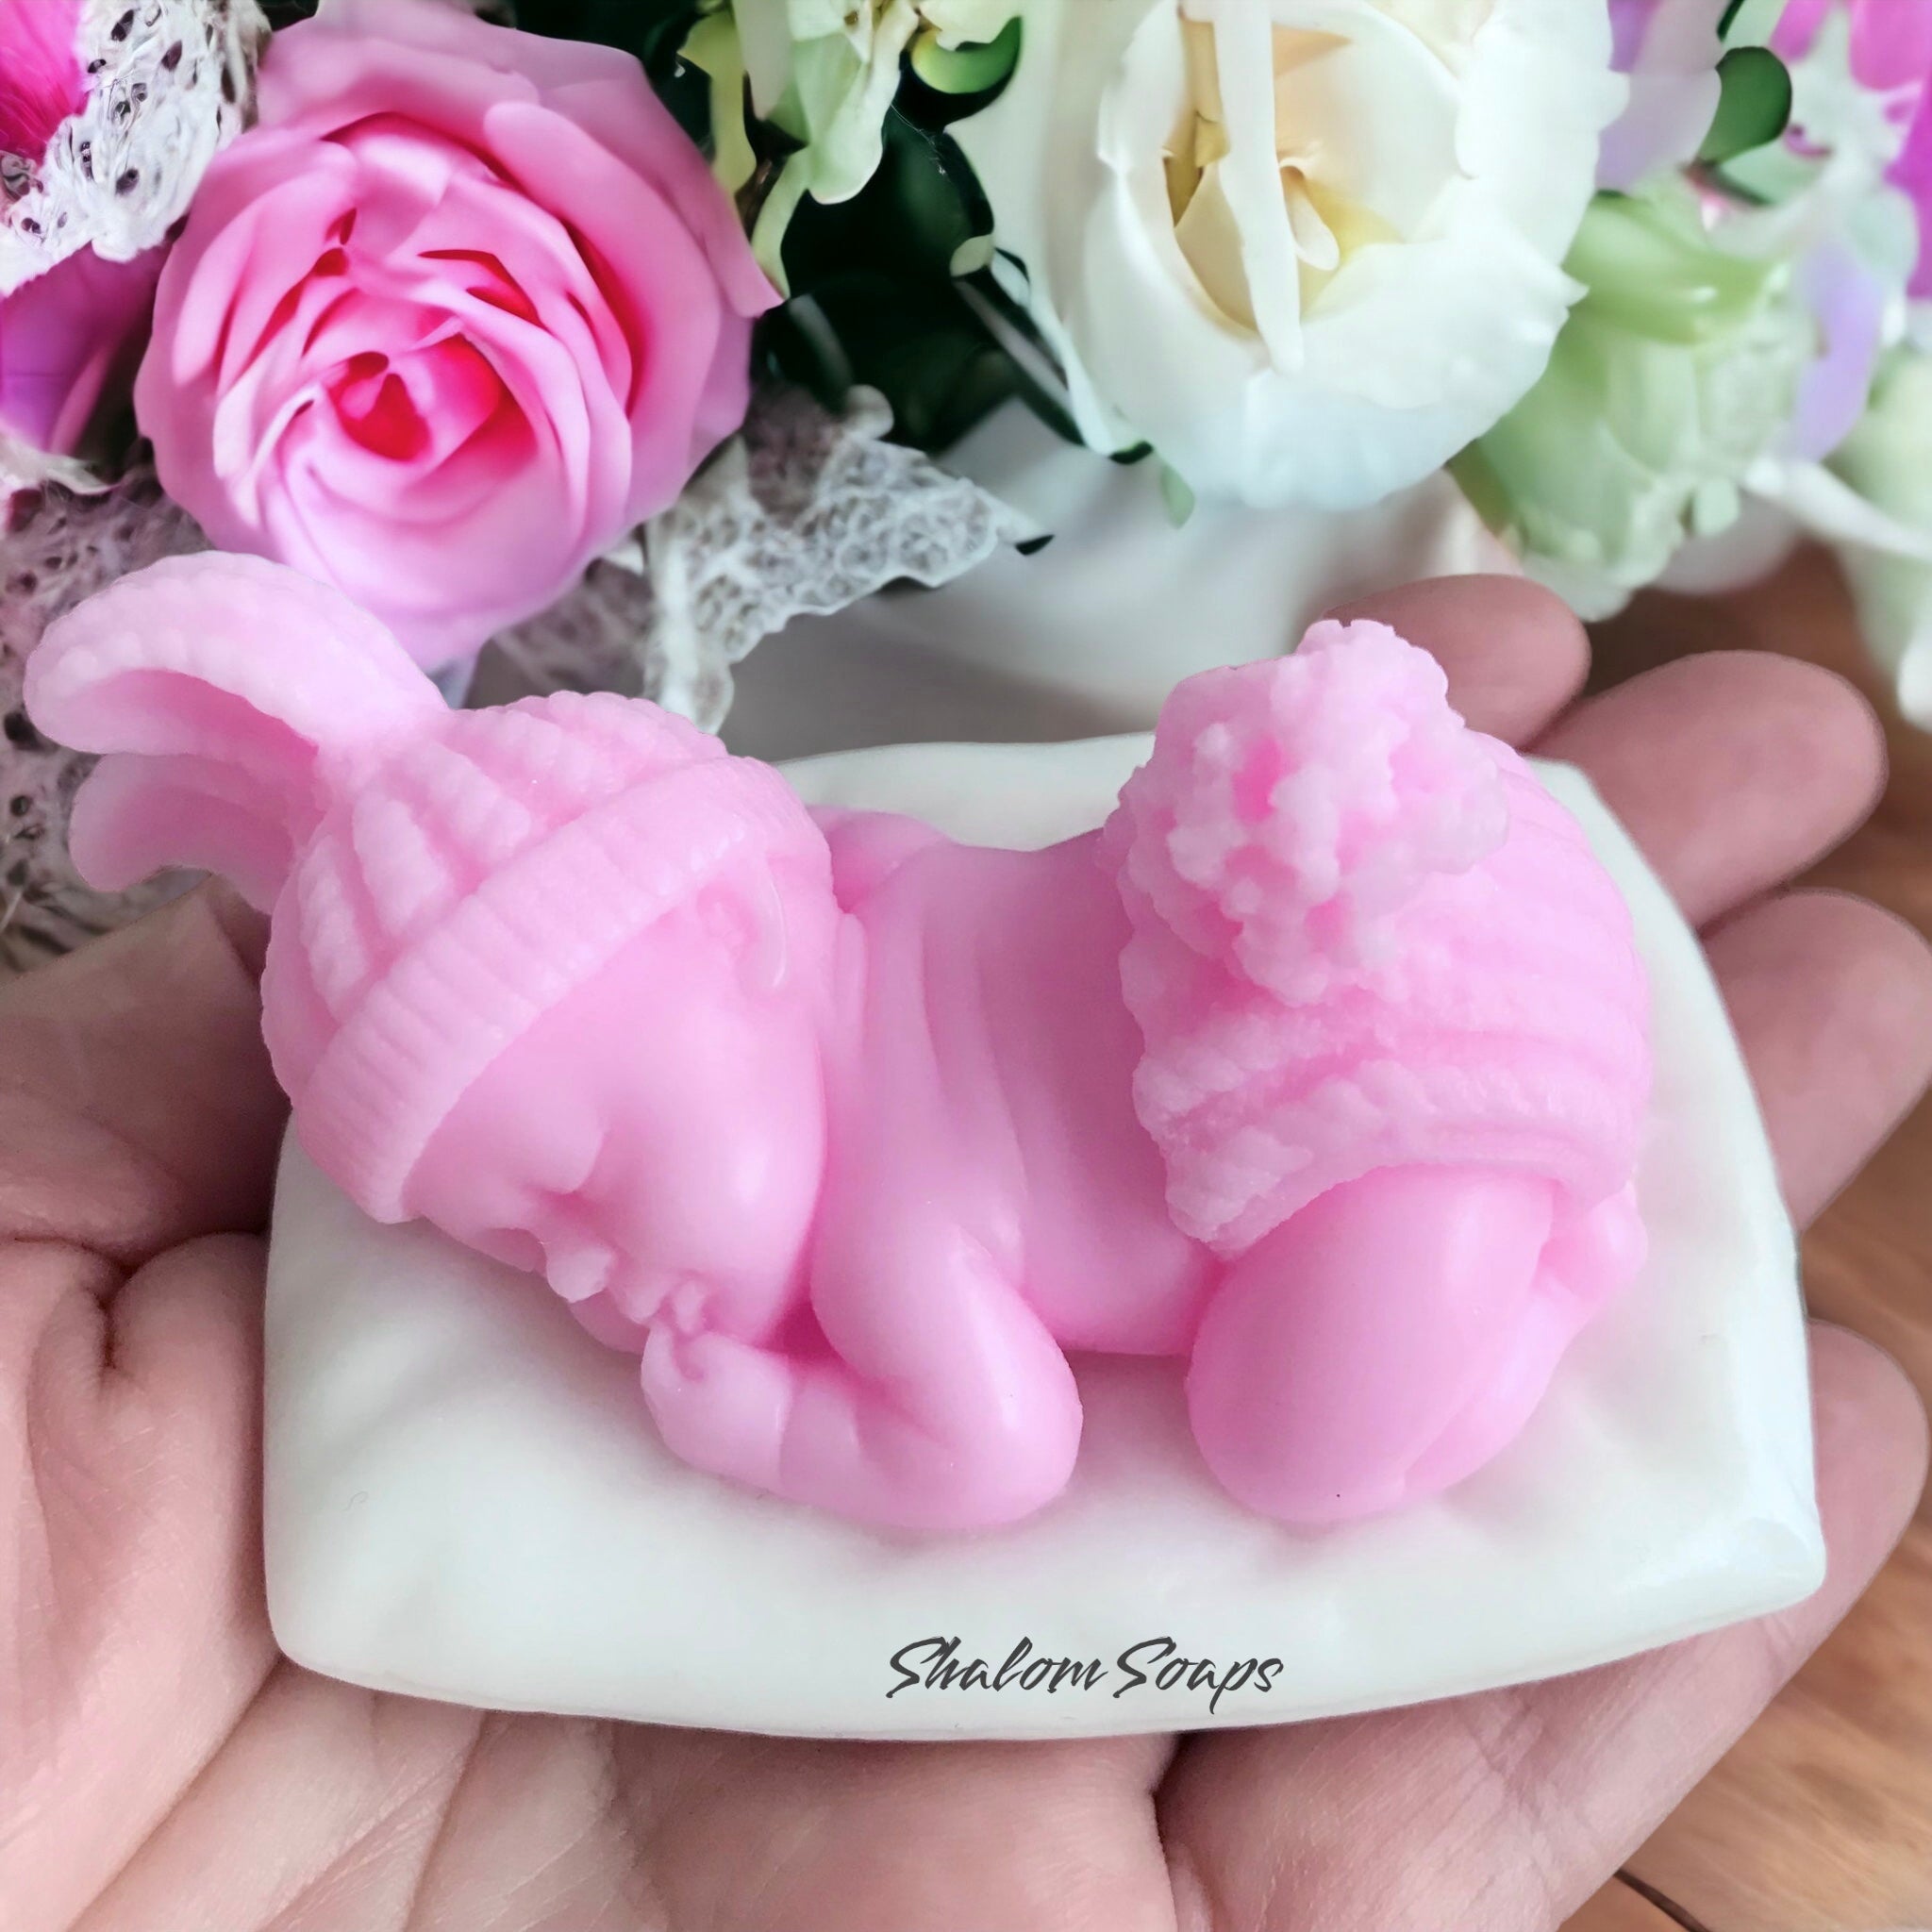 3D Baby on a Pillow Soap